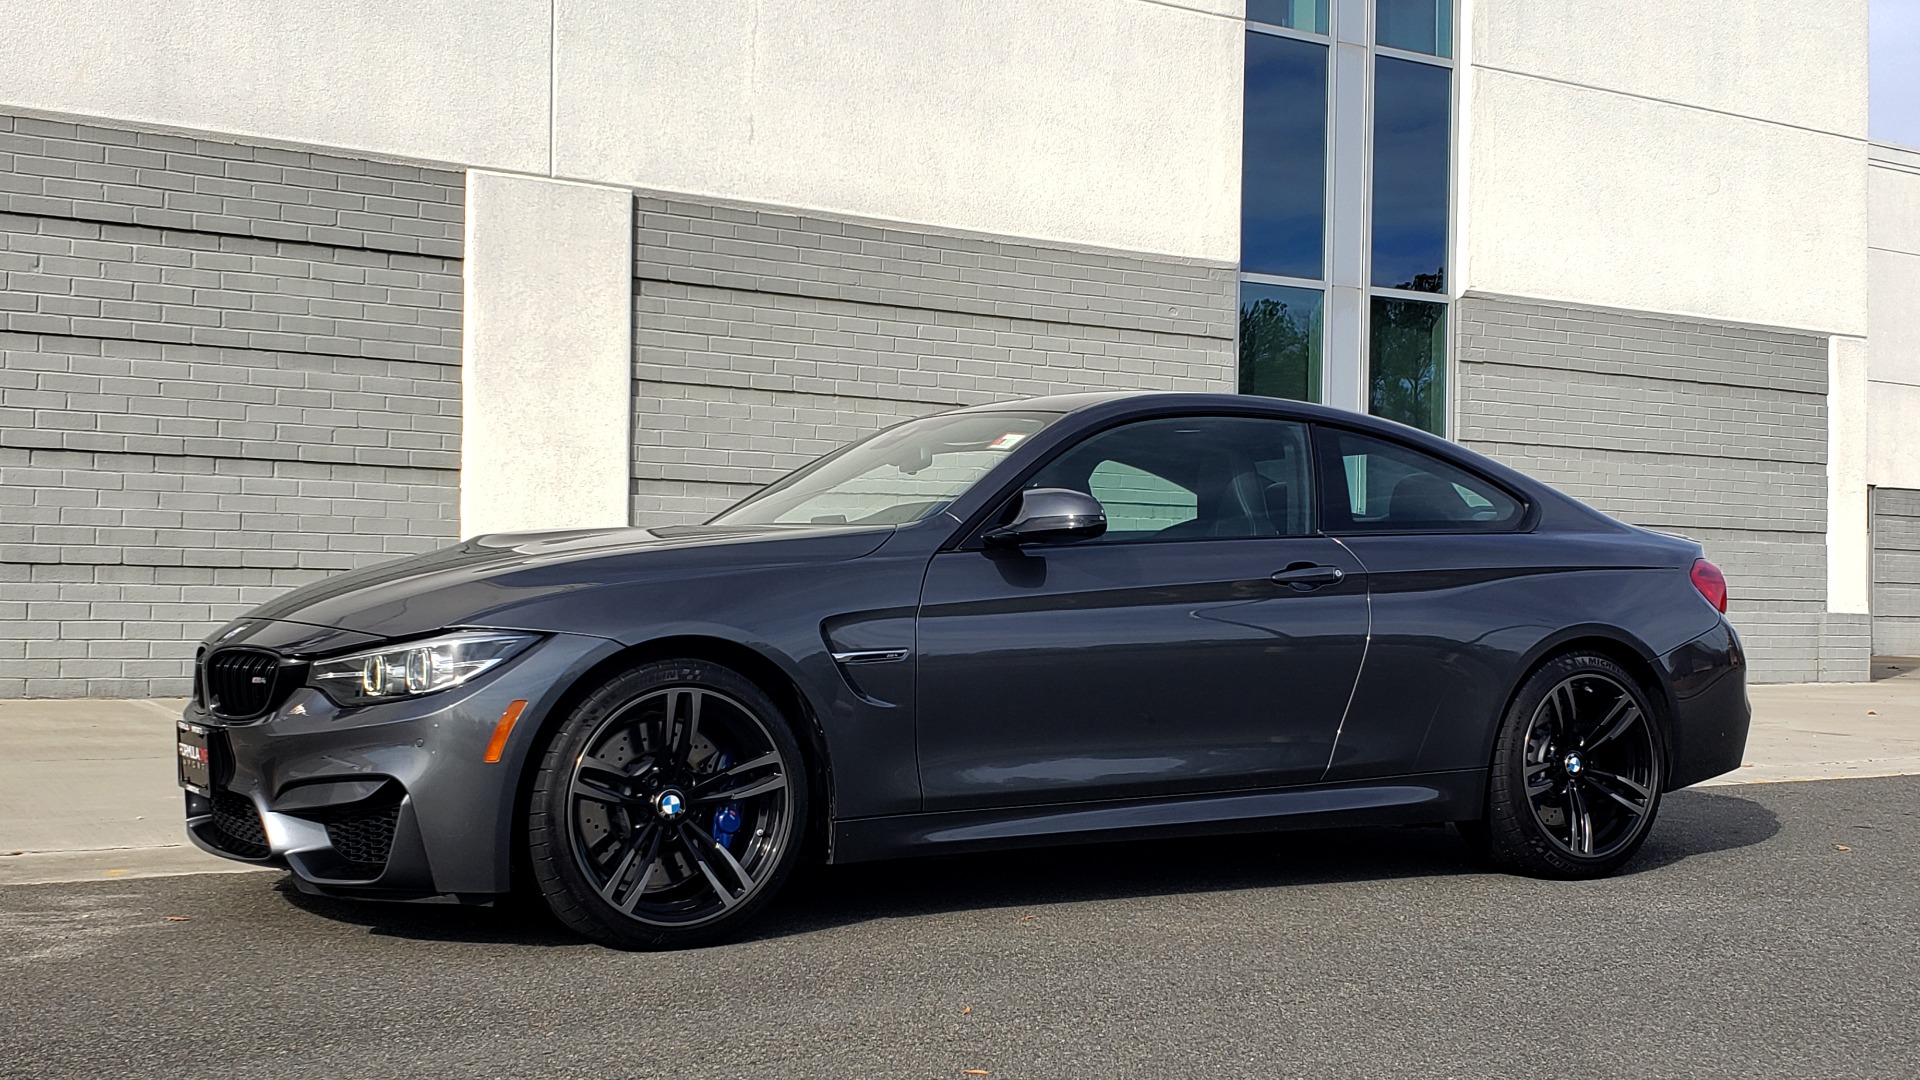 Used 2019 BMW M4 COUPE 3.0L 425HP / 7-SPD AUTO / NAV / 19-IN WHEELS / REARVIEW for sale $67,999 at Formula Imports in Charlotte NC 28227 4